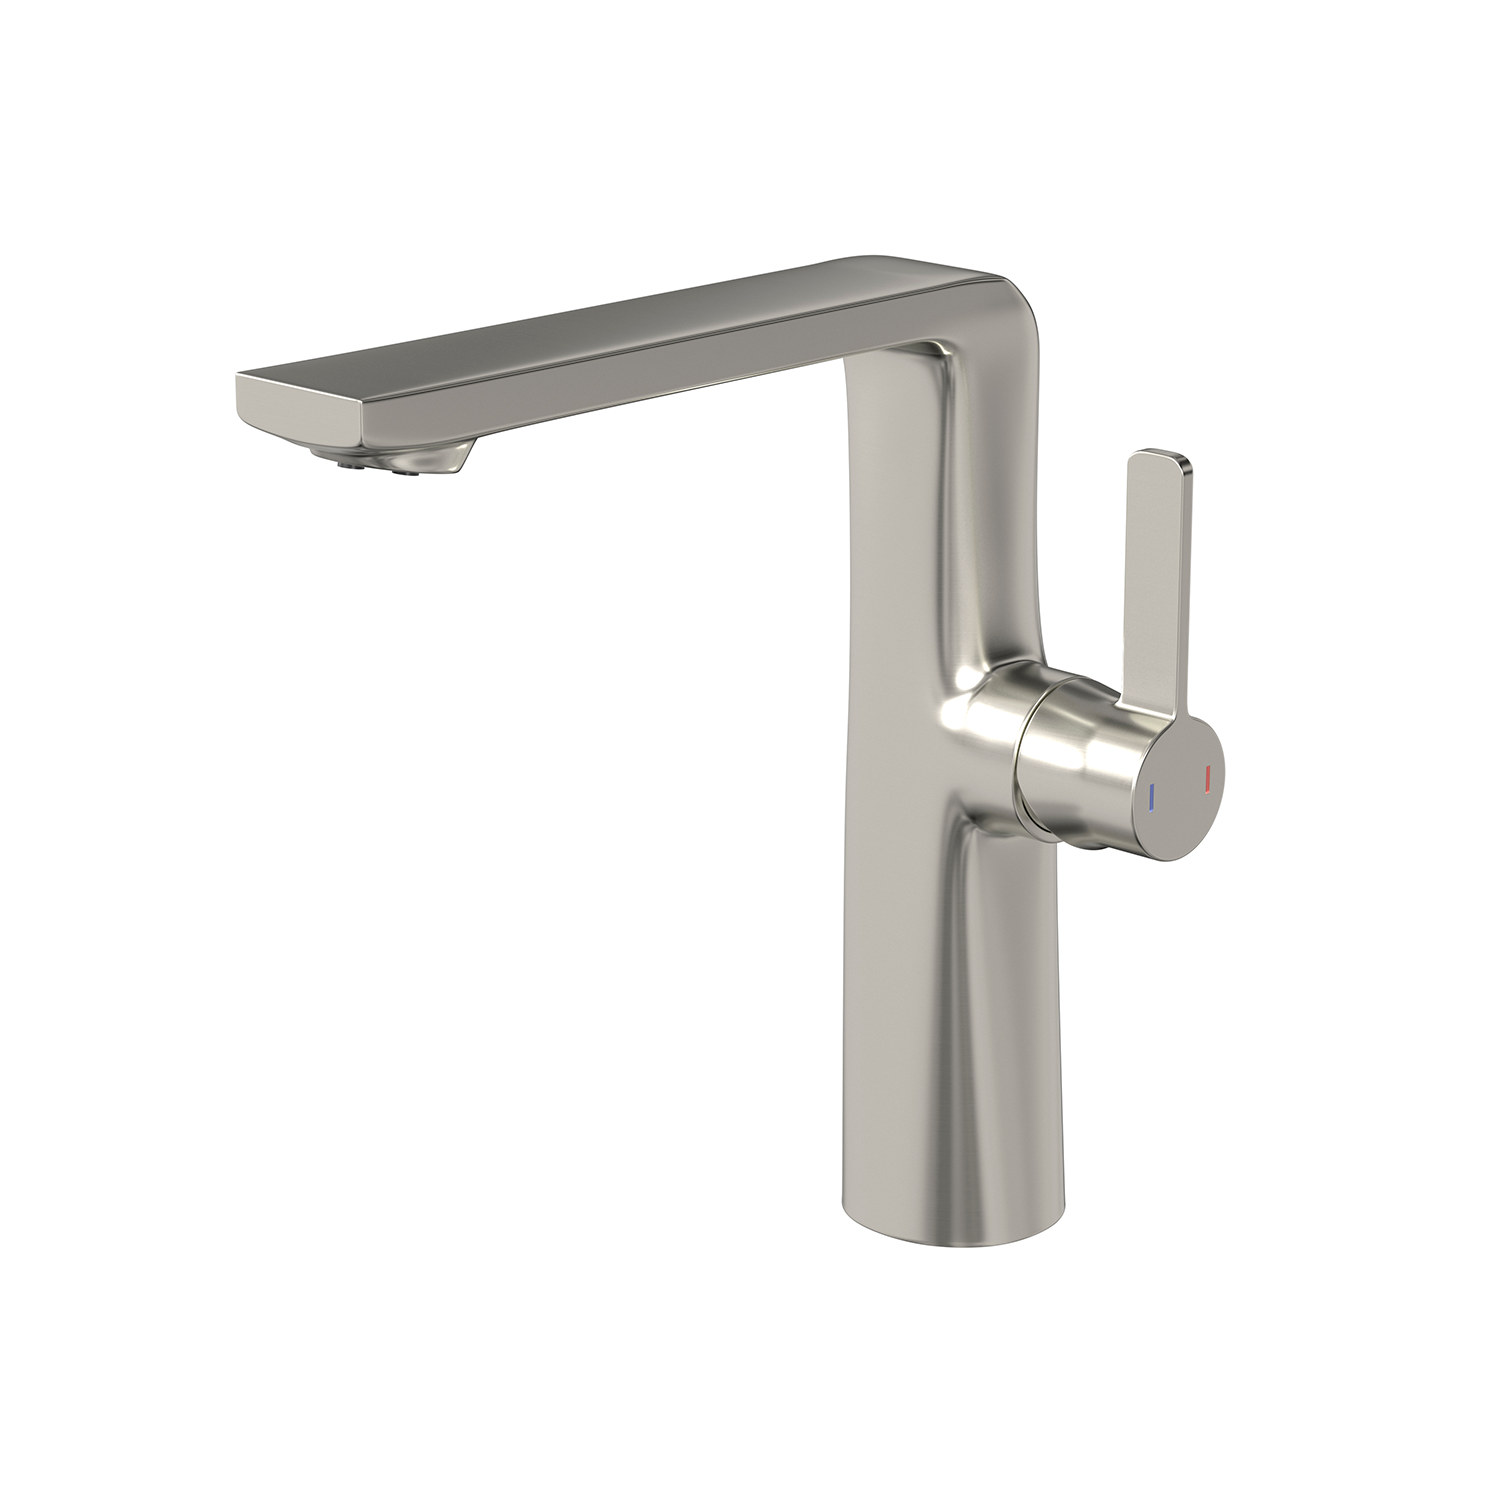 DAX Single Handle Bathroom Vessel Sink Faucet, Brass Body, Chrome Finish, Spout Height 8-3/4 Inches (DAX-8226A)